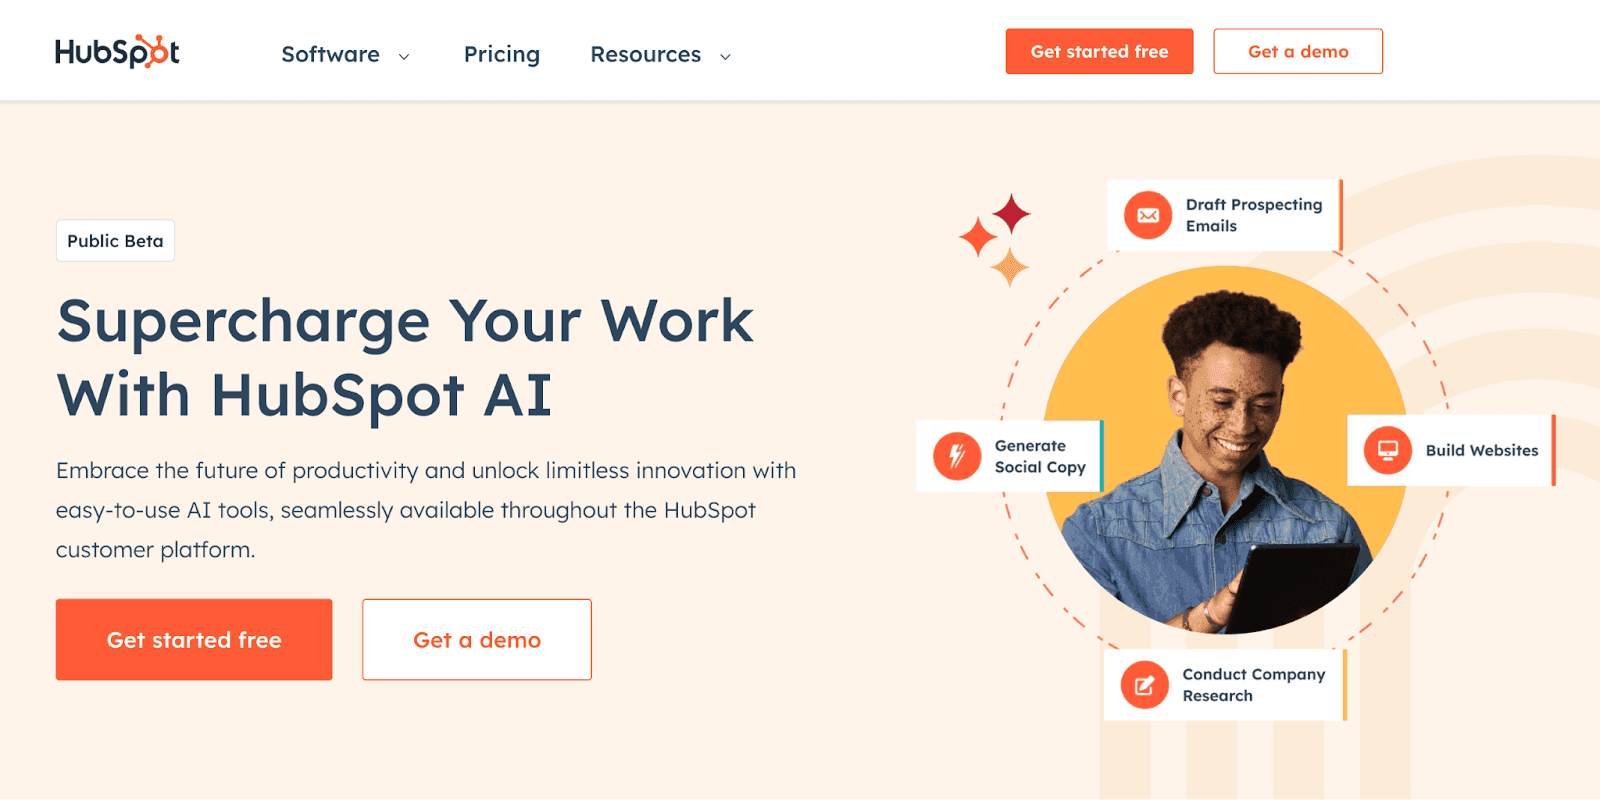 Supercharge your work with HubSpot AI